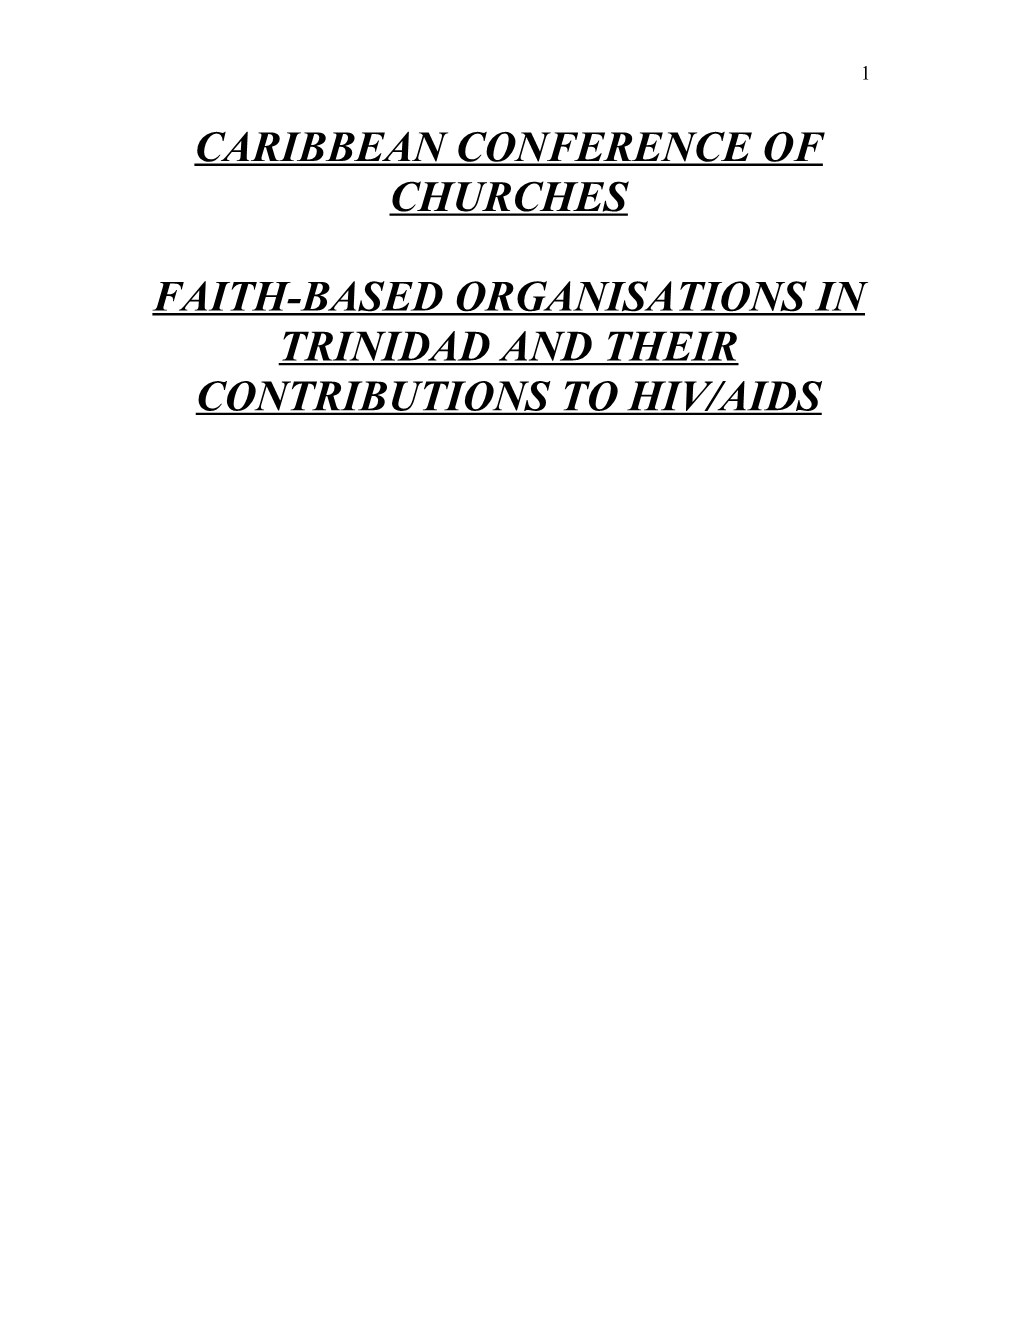 Caribbean Conference of Churches